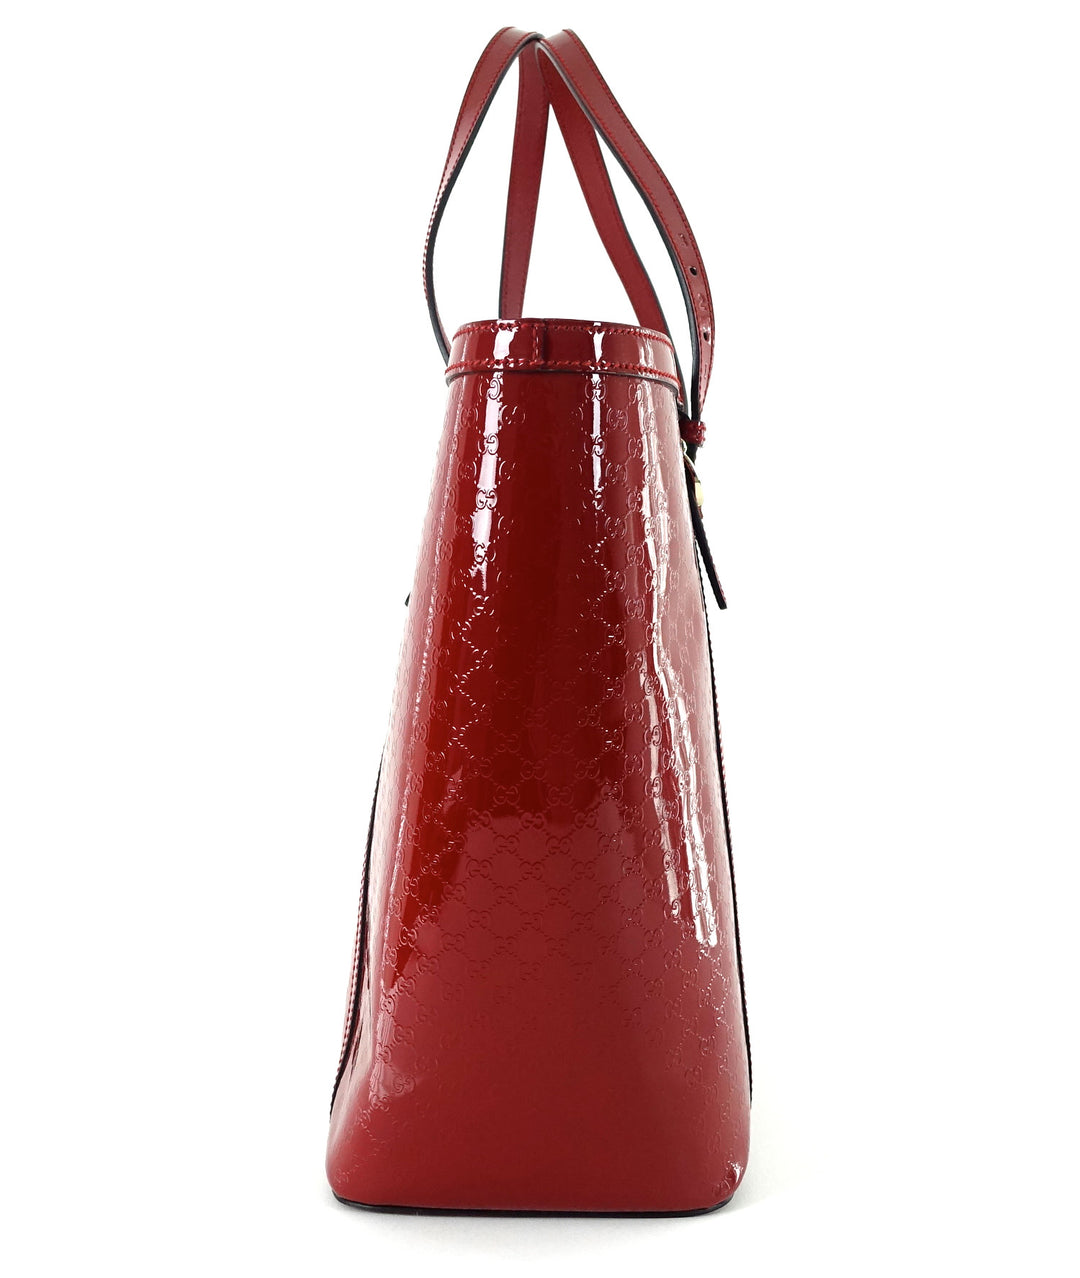 nice guccissima patent leather tote bag